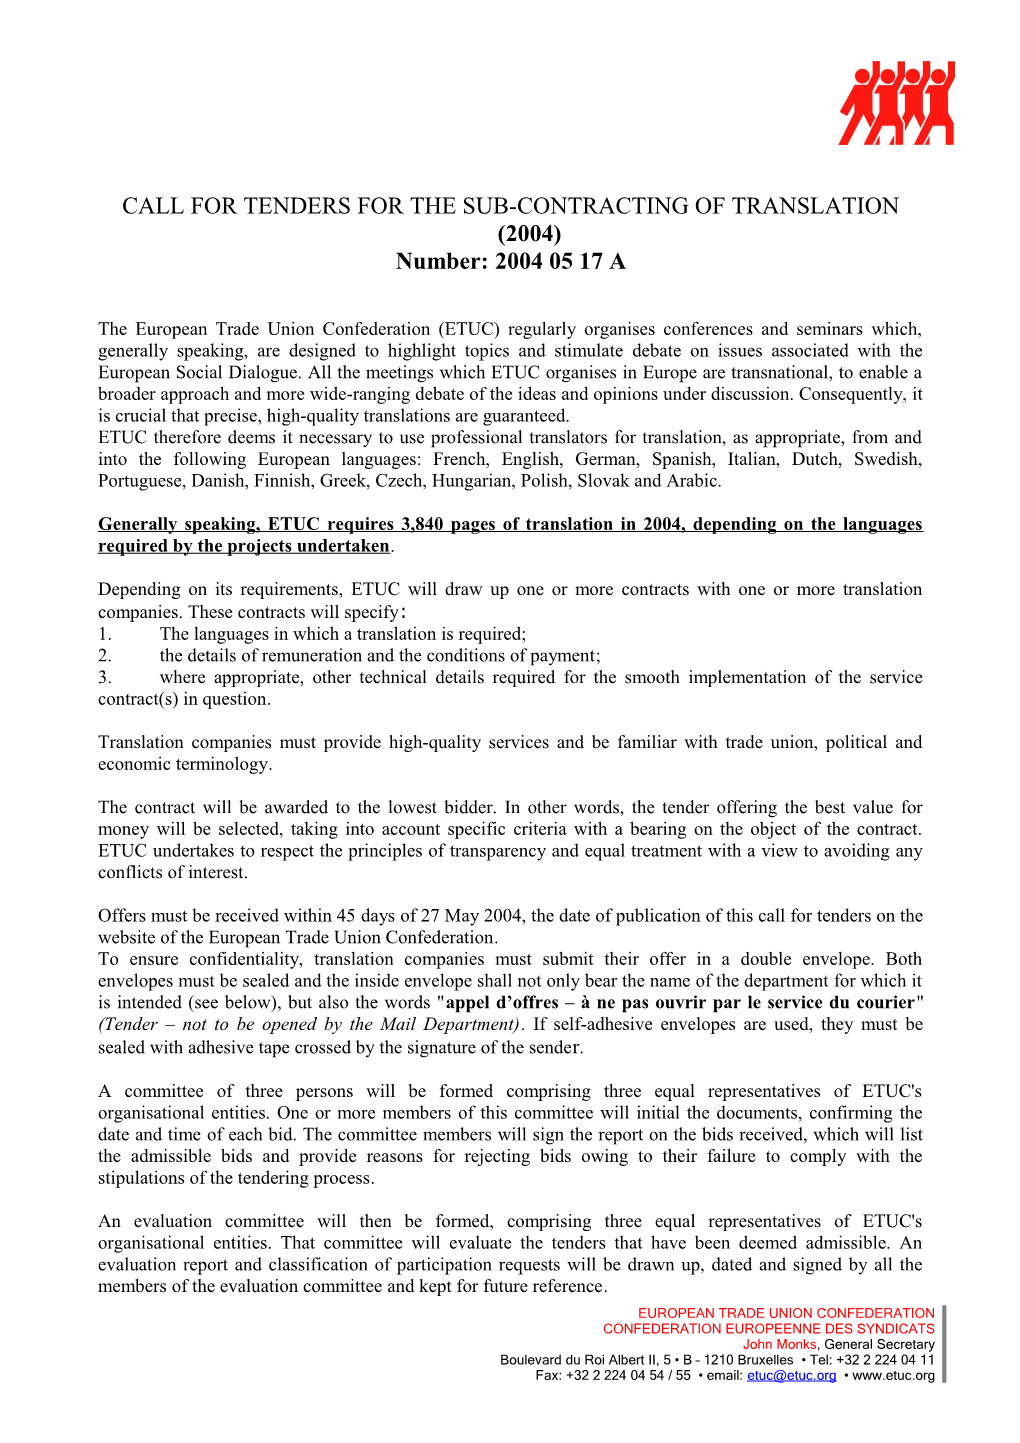 CALL for TENDERS for the SUB-CONTRACTING of TRANSLATION 2004 (Doc,16/06/04)